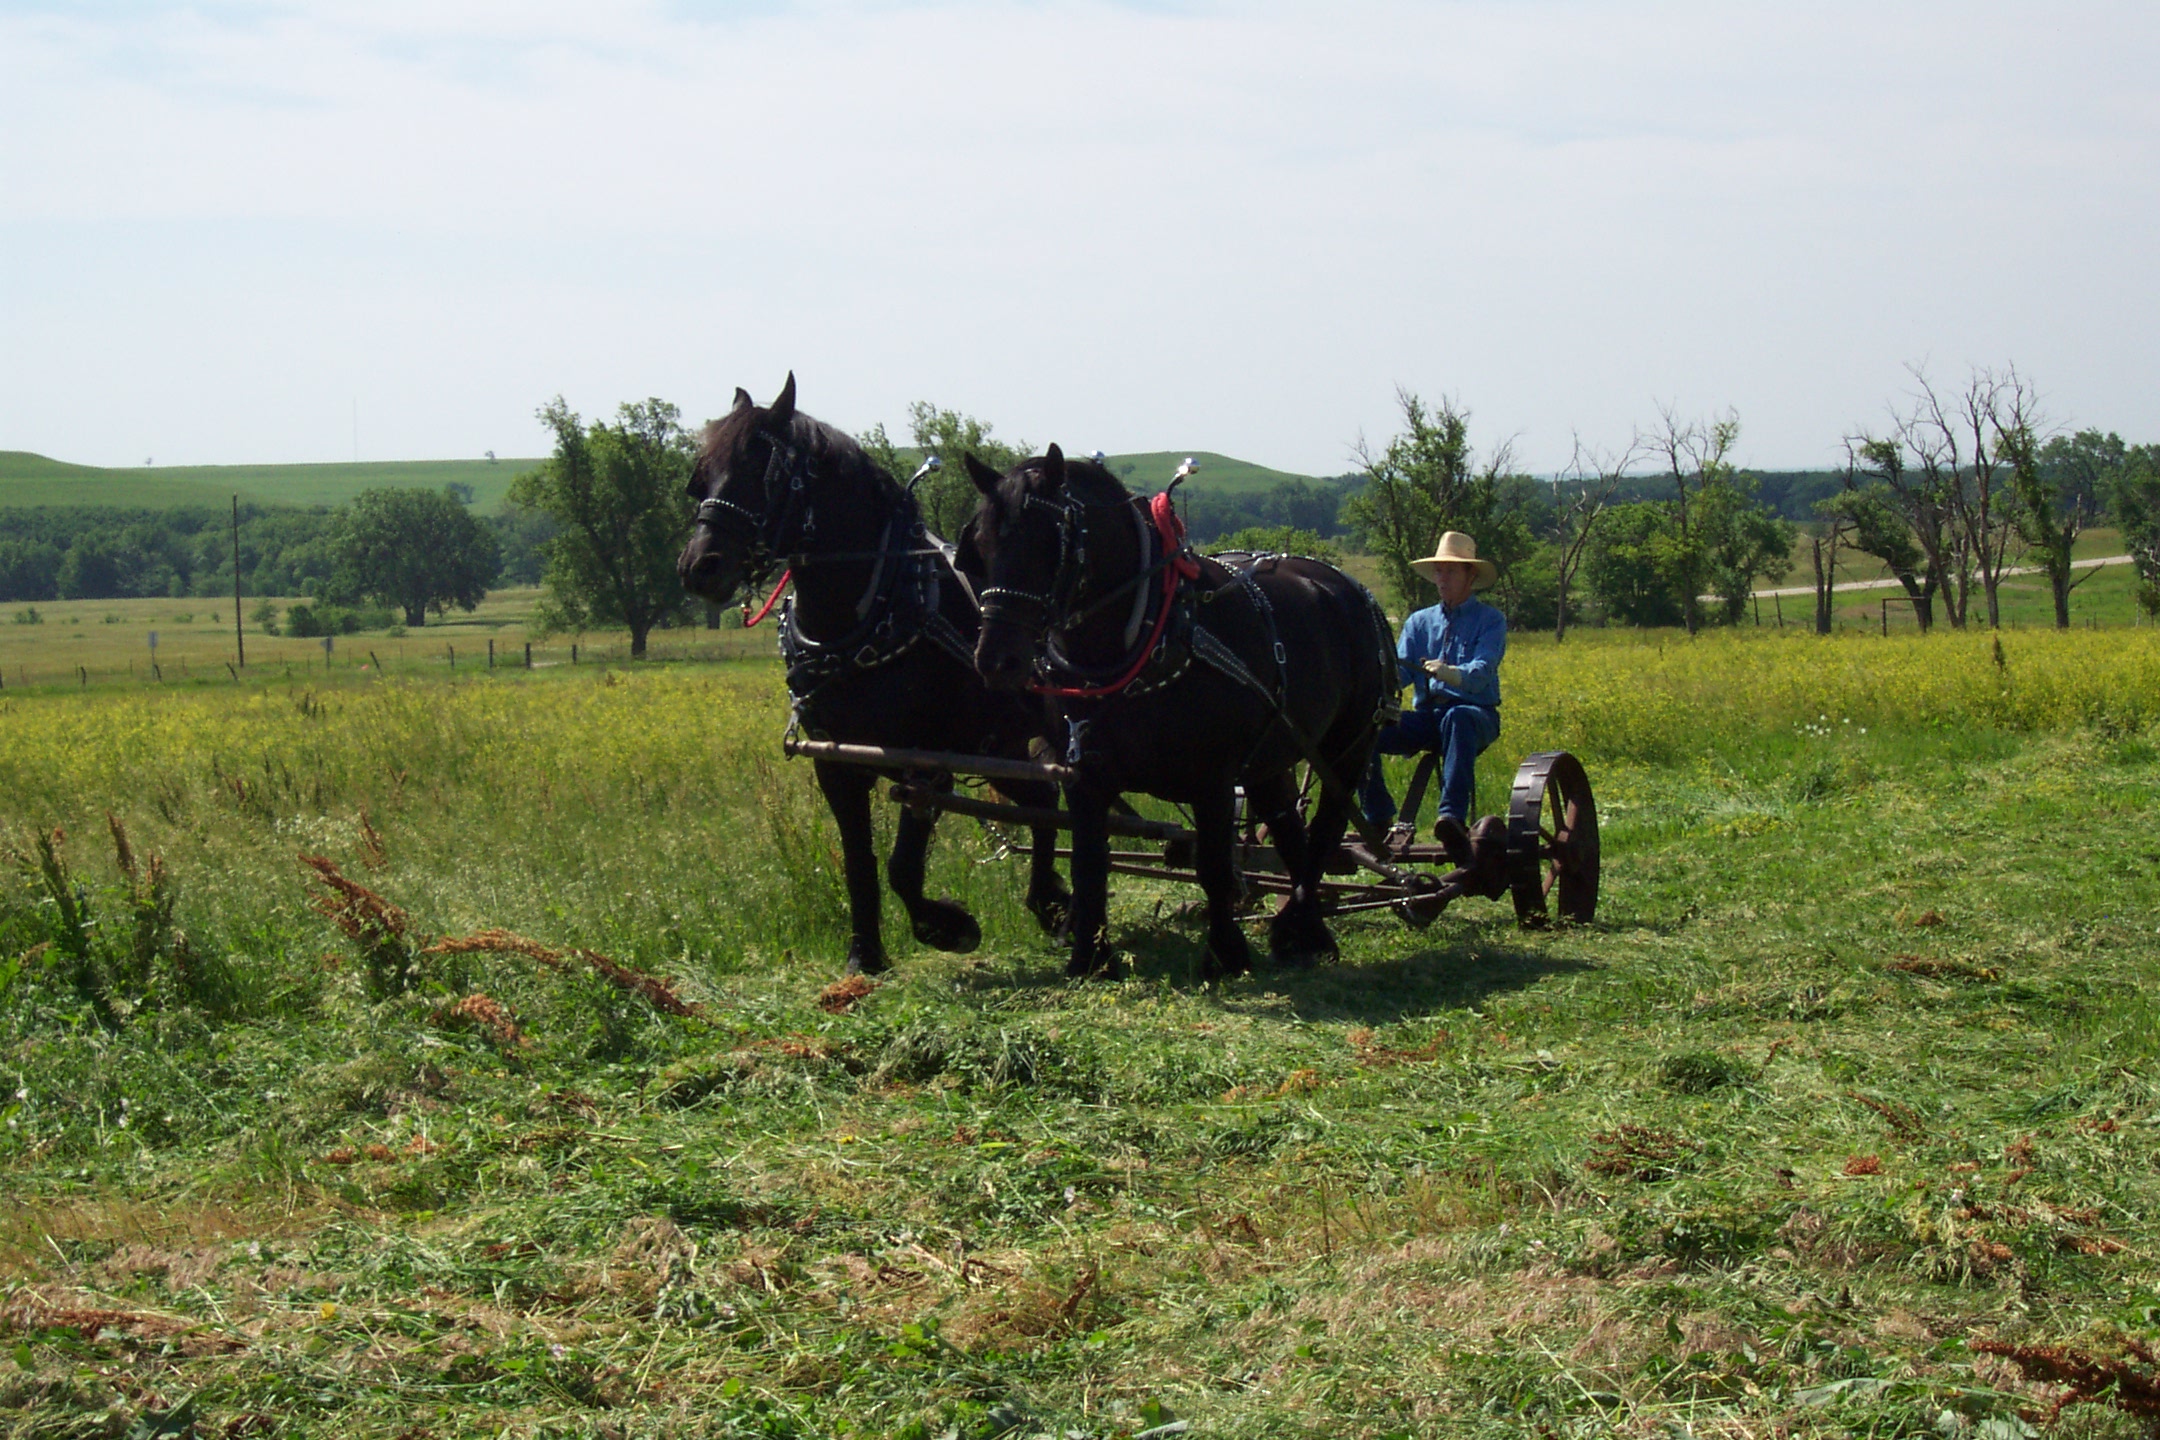 haying the field using a horse-drawn mower